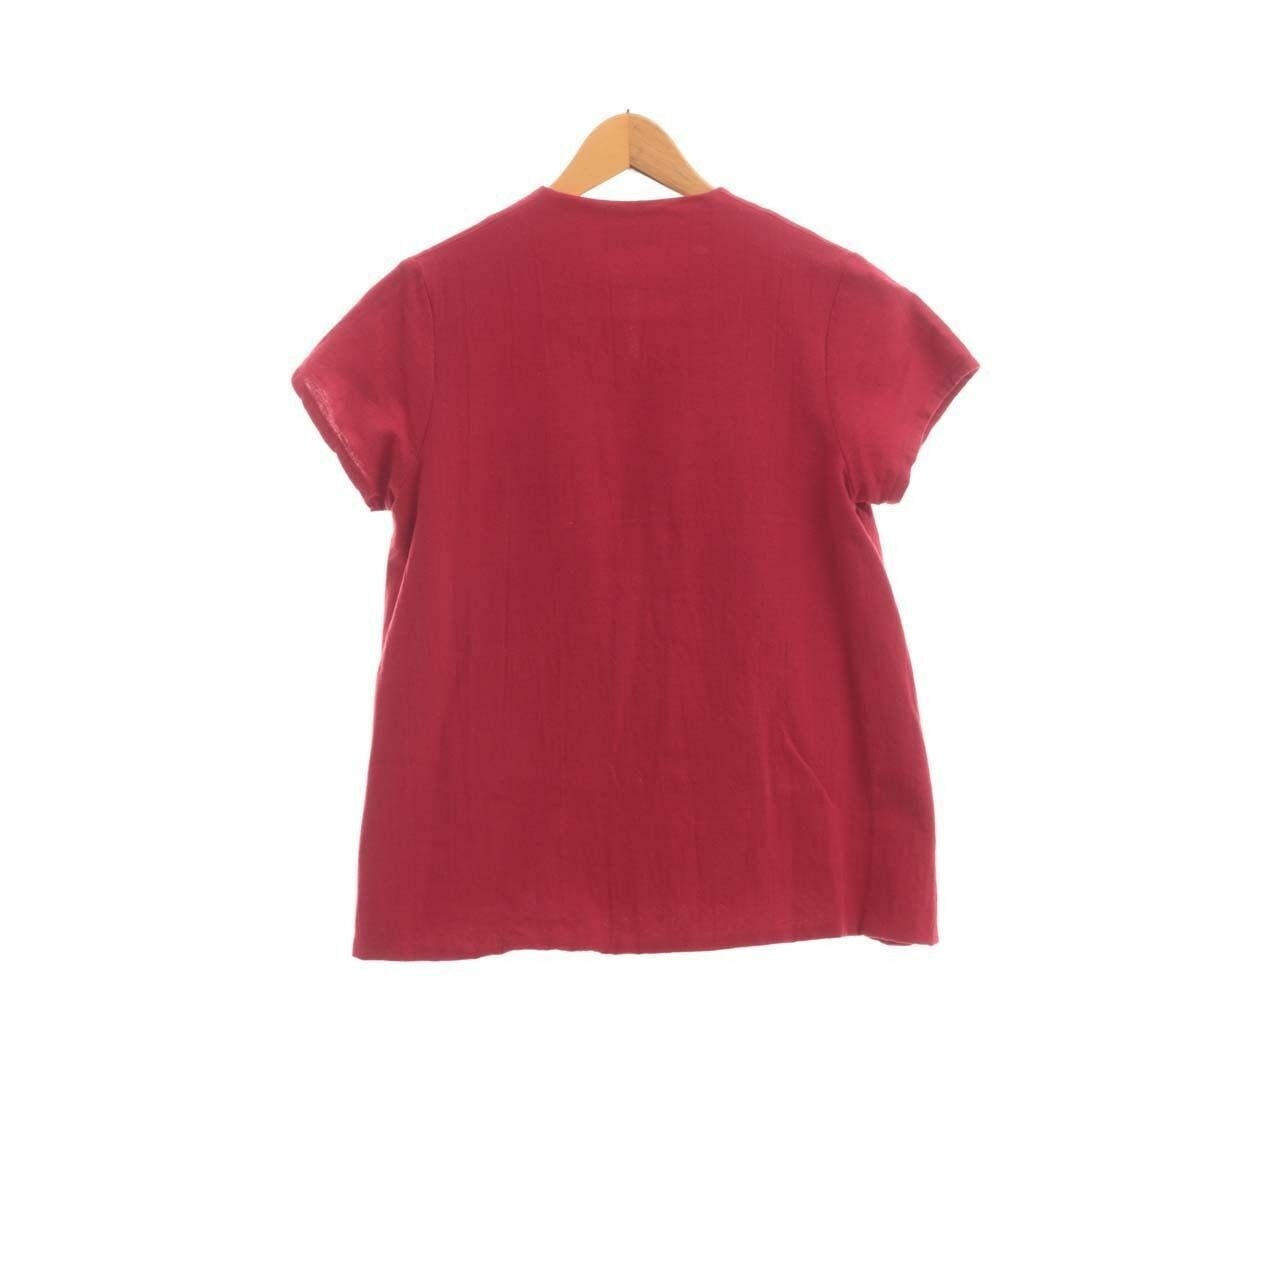 Beatrice Clothing Maroon Blouse